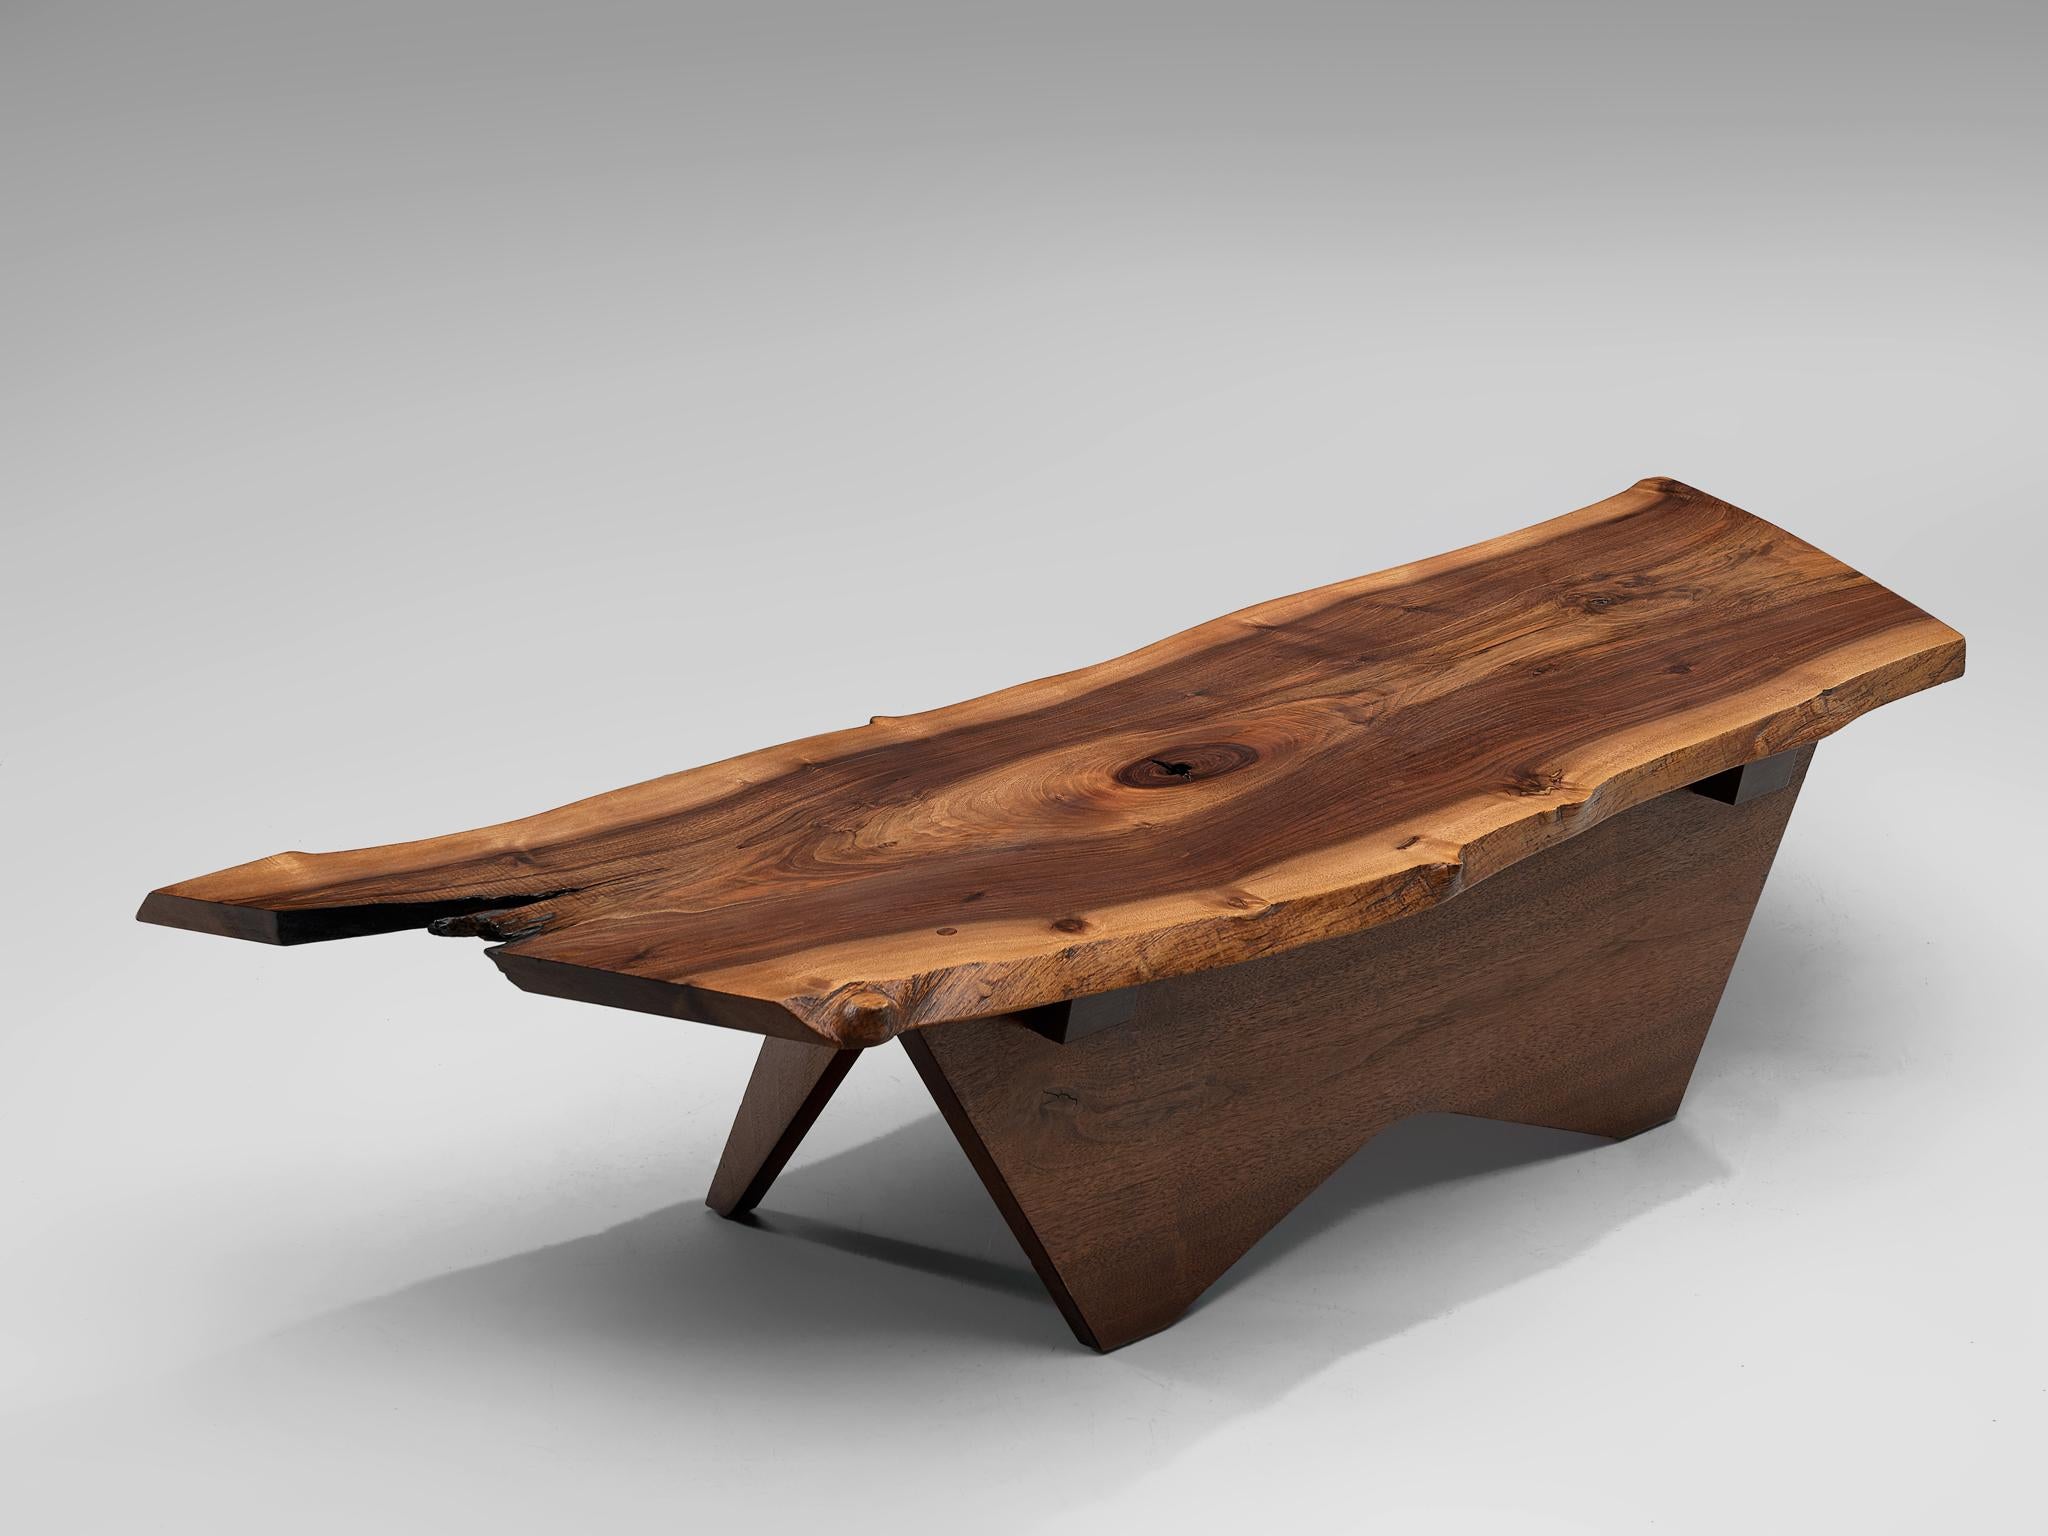 George Nakashima, Slab coffee table, American walnut, United States, 1958 or 1962

A slab coffee table made of a solid board top of black American walnut. The coffee table is designed to express the character of a particular slab. The top features